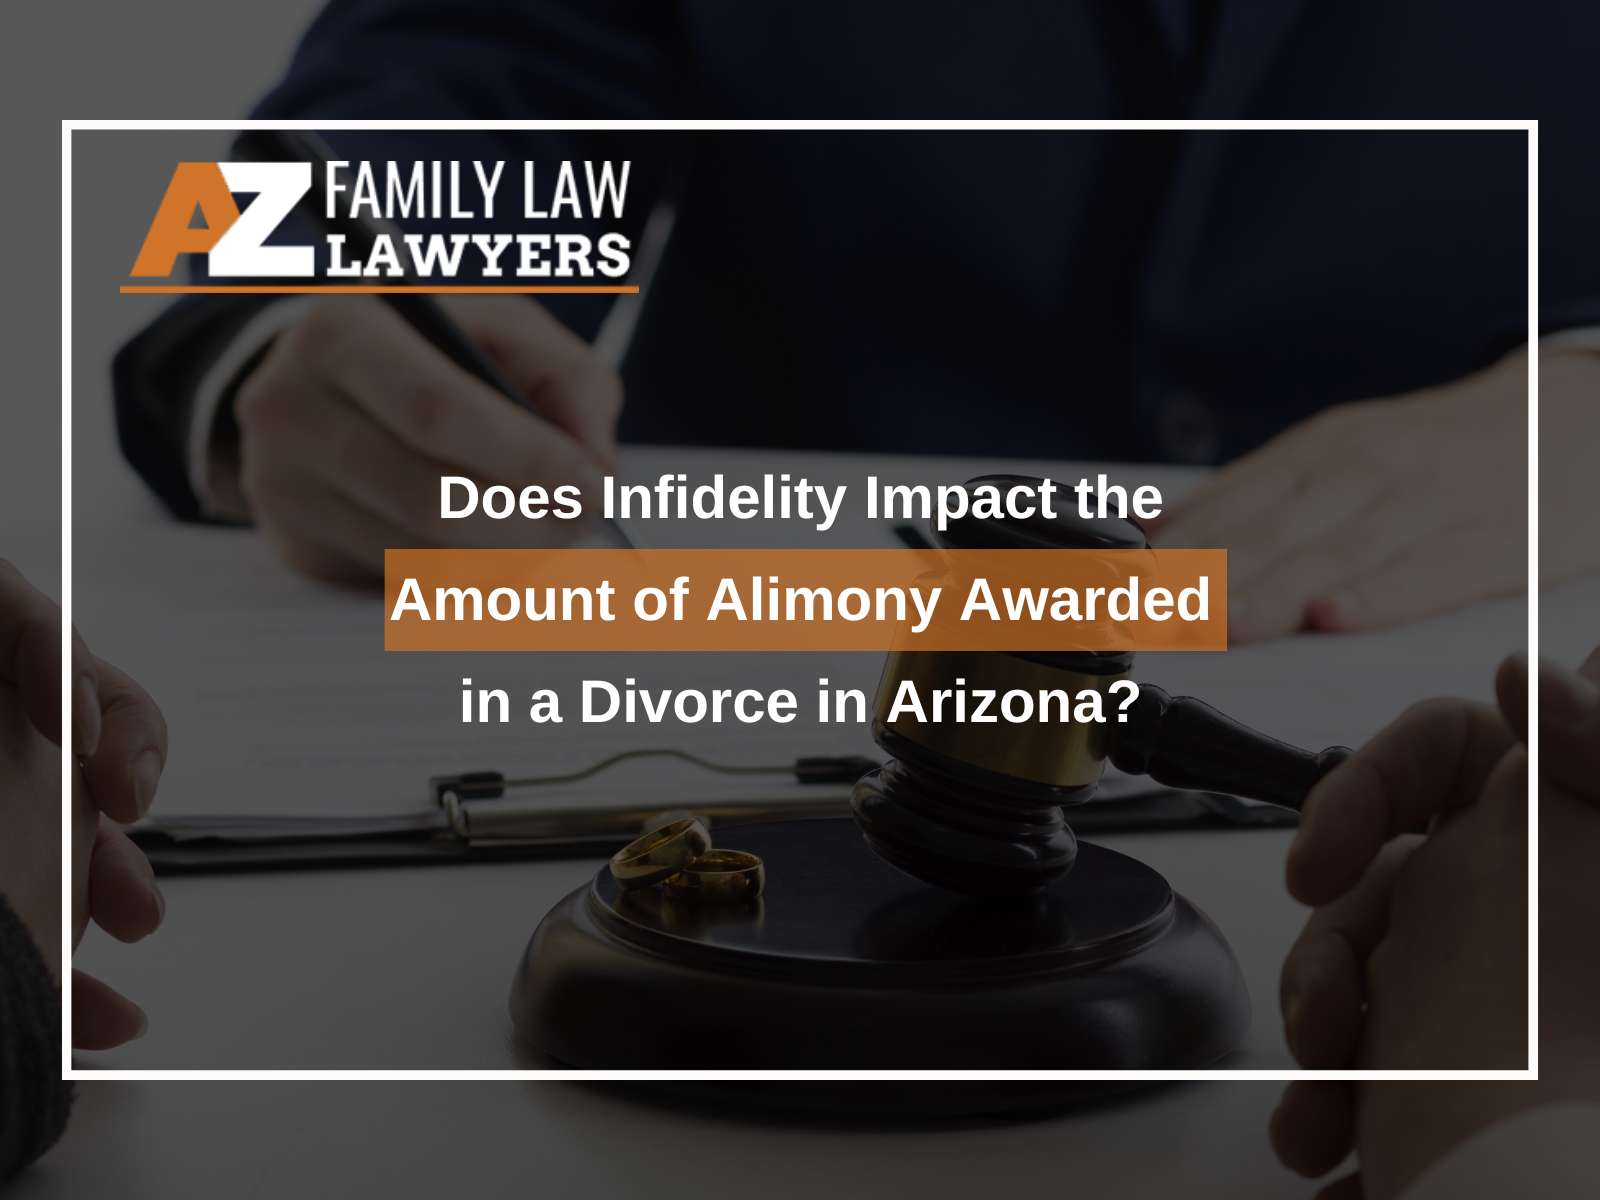 Does Infidelity Impact the Amount of Alimony Awarded in a Divorce in Arizona?